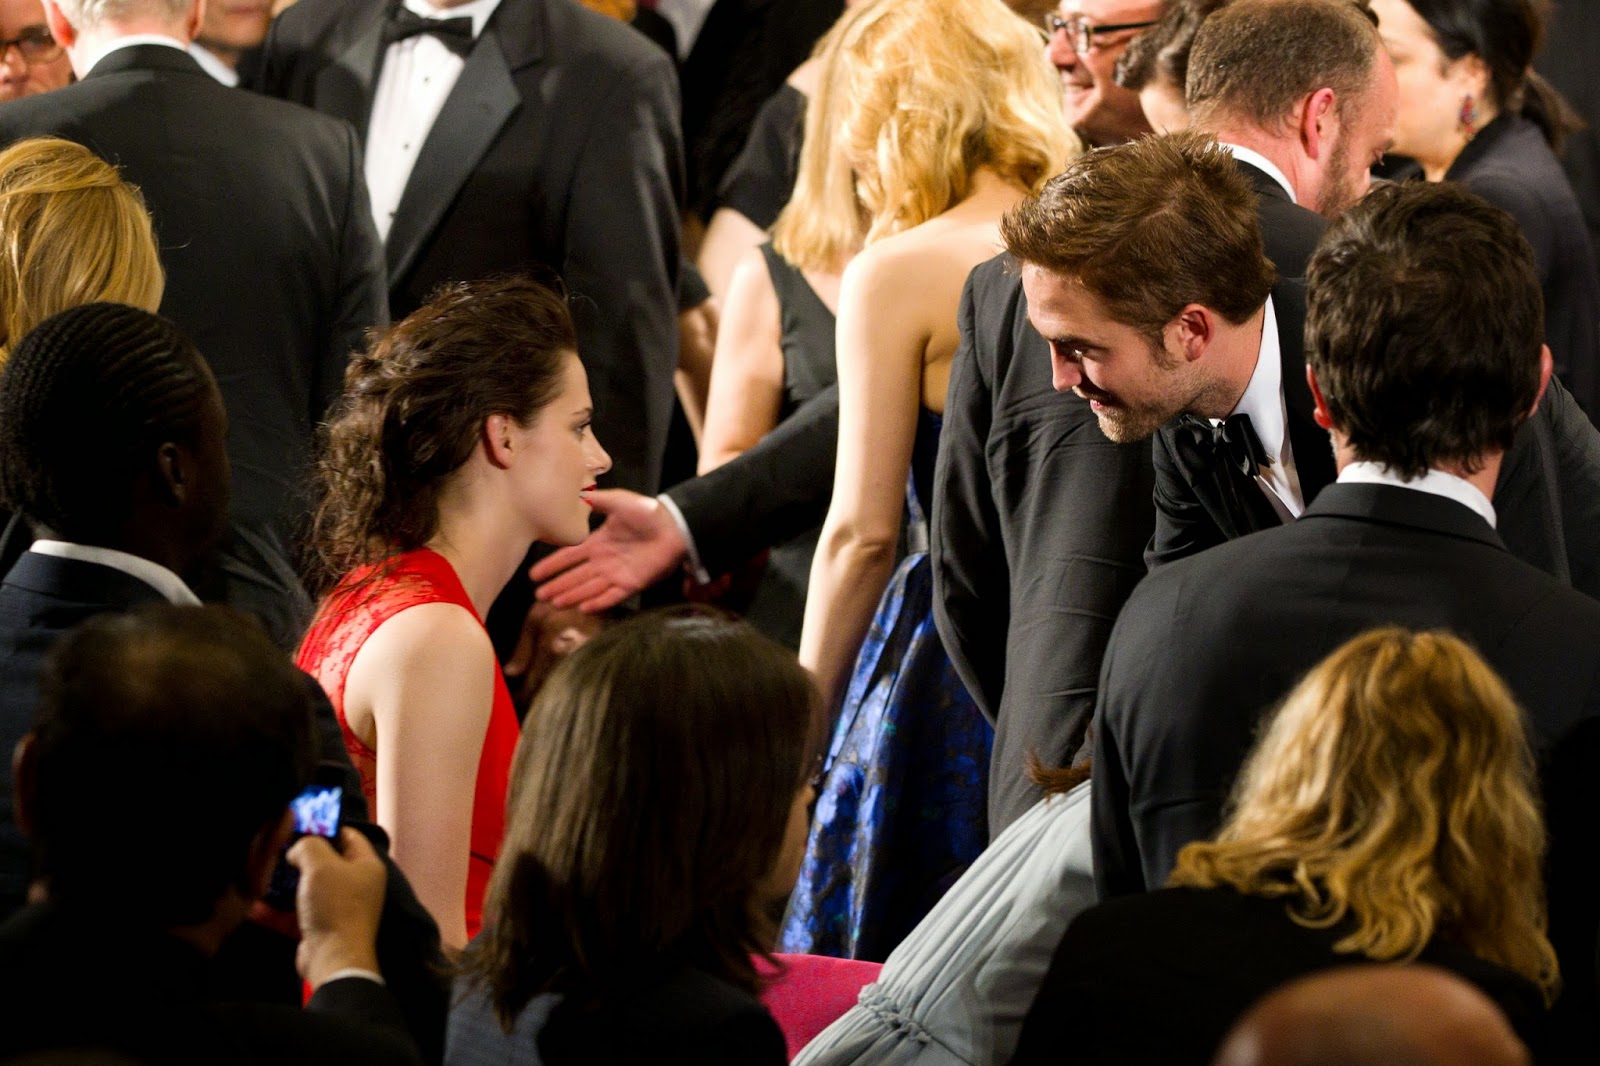 Beyond-Twilight: Rob and Kristen: Cannes Here We Come